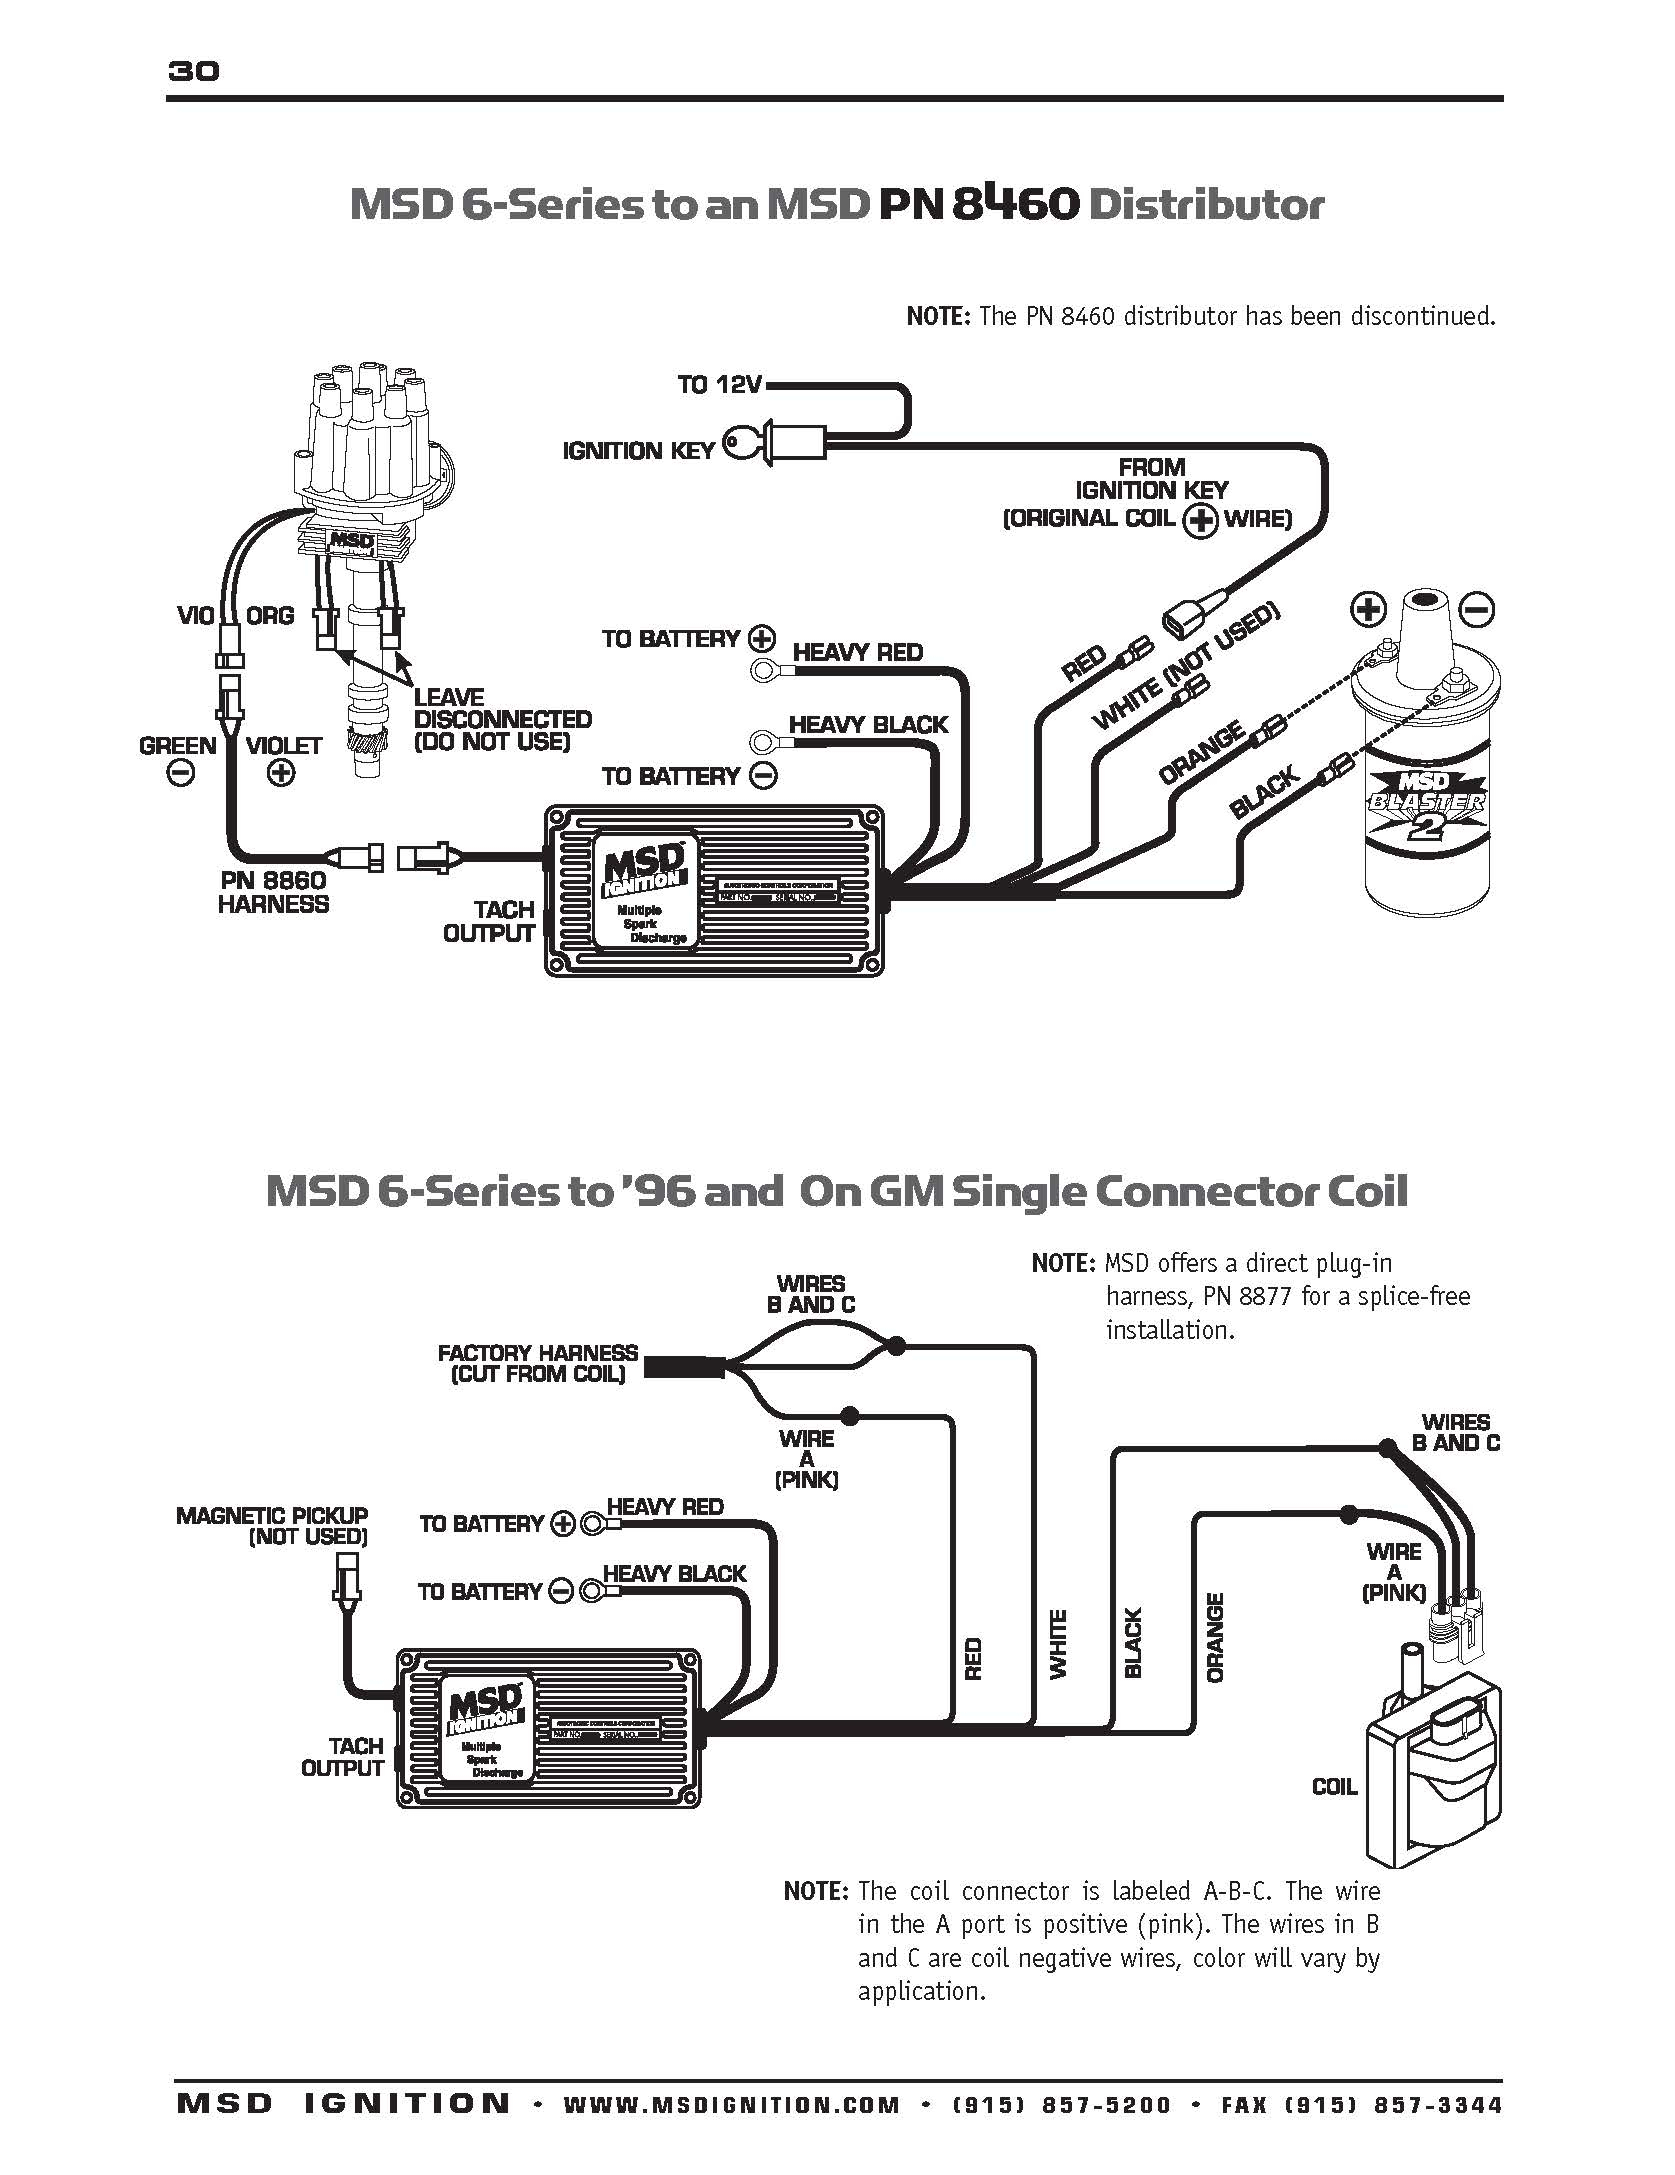 Msd Distributor Wiring Diagram Two Wire - Wiring Diagrams Hubs - Msd Wiring Diagram